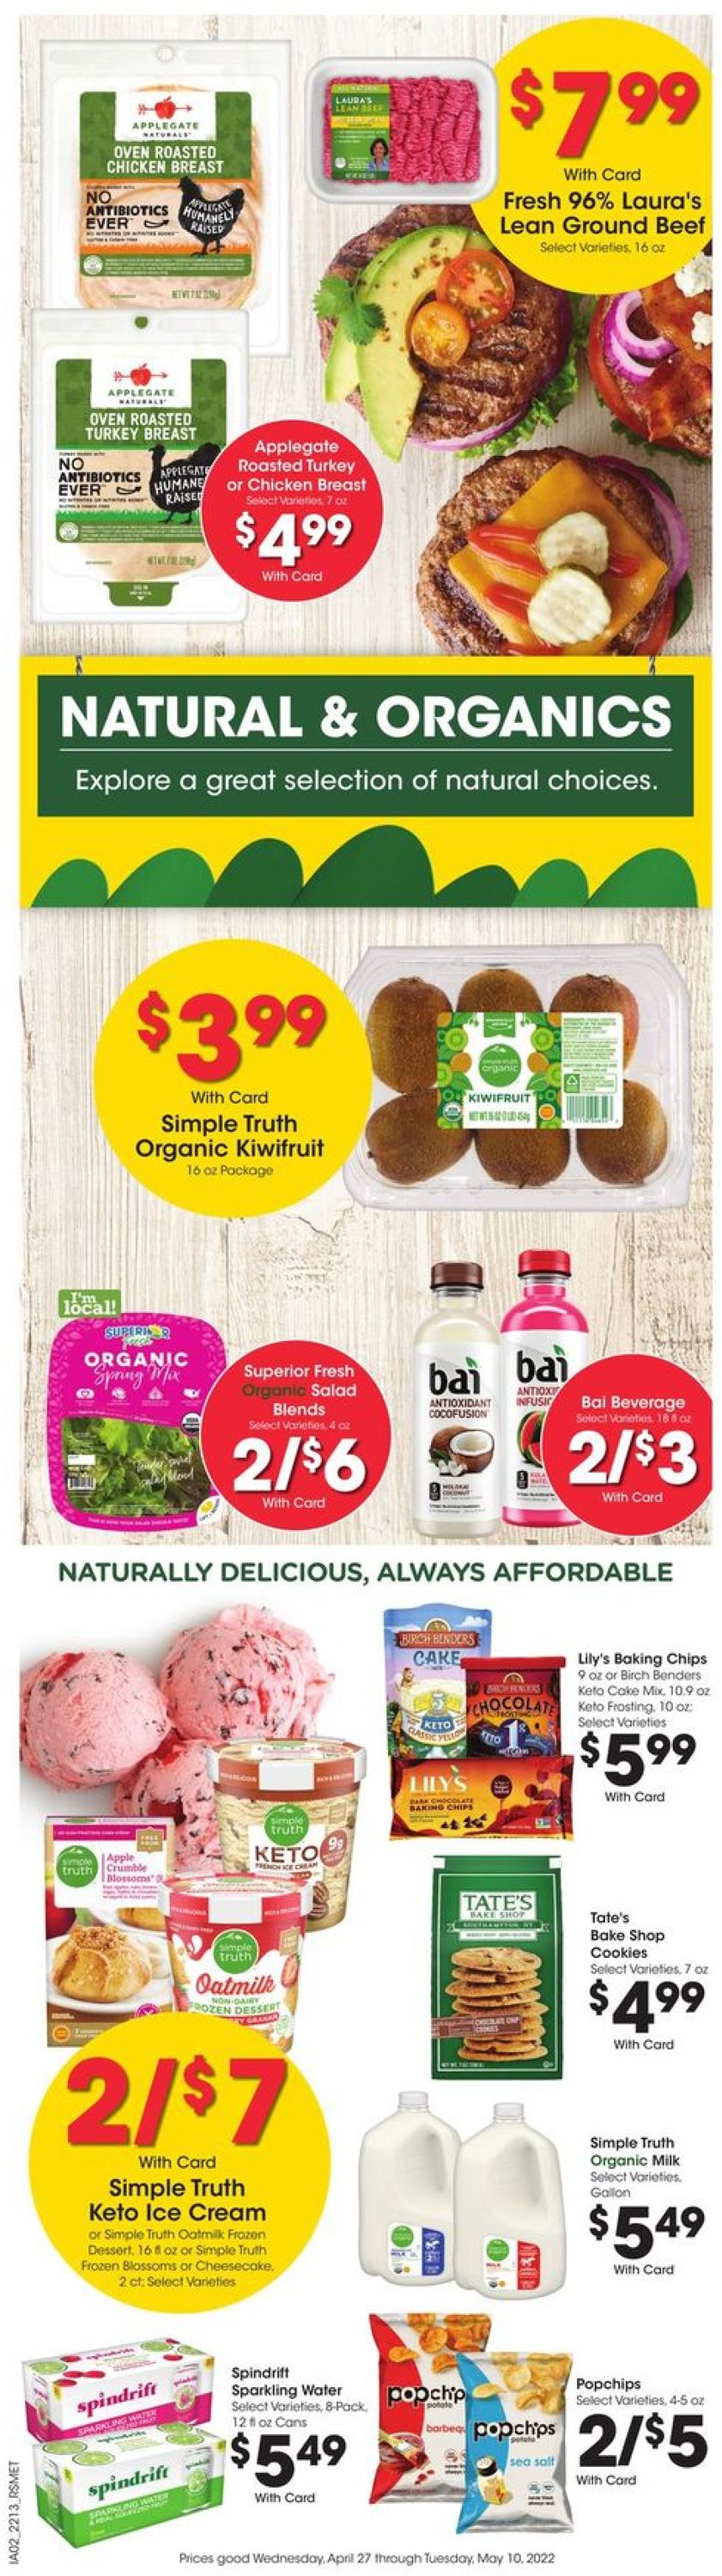 Pick 'n Save Current weekly ad 04/27 - 05/03/2022 [9] - frequent 